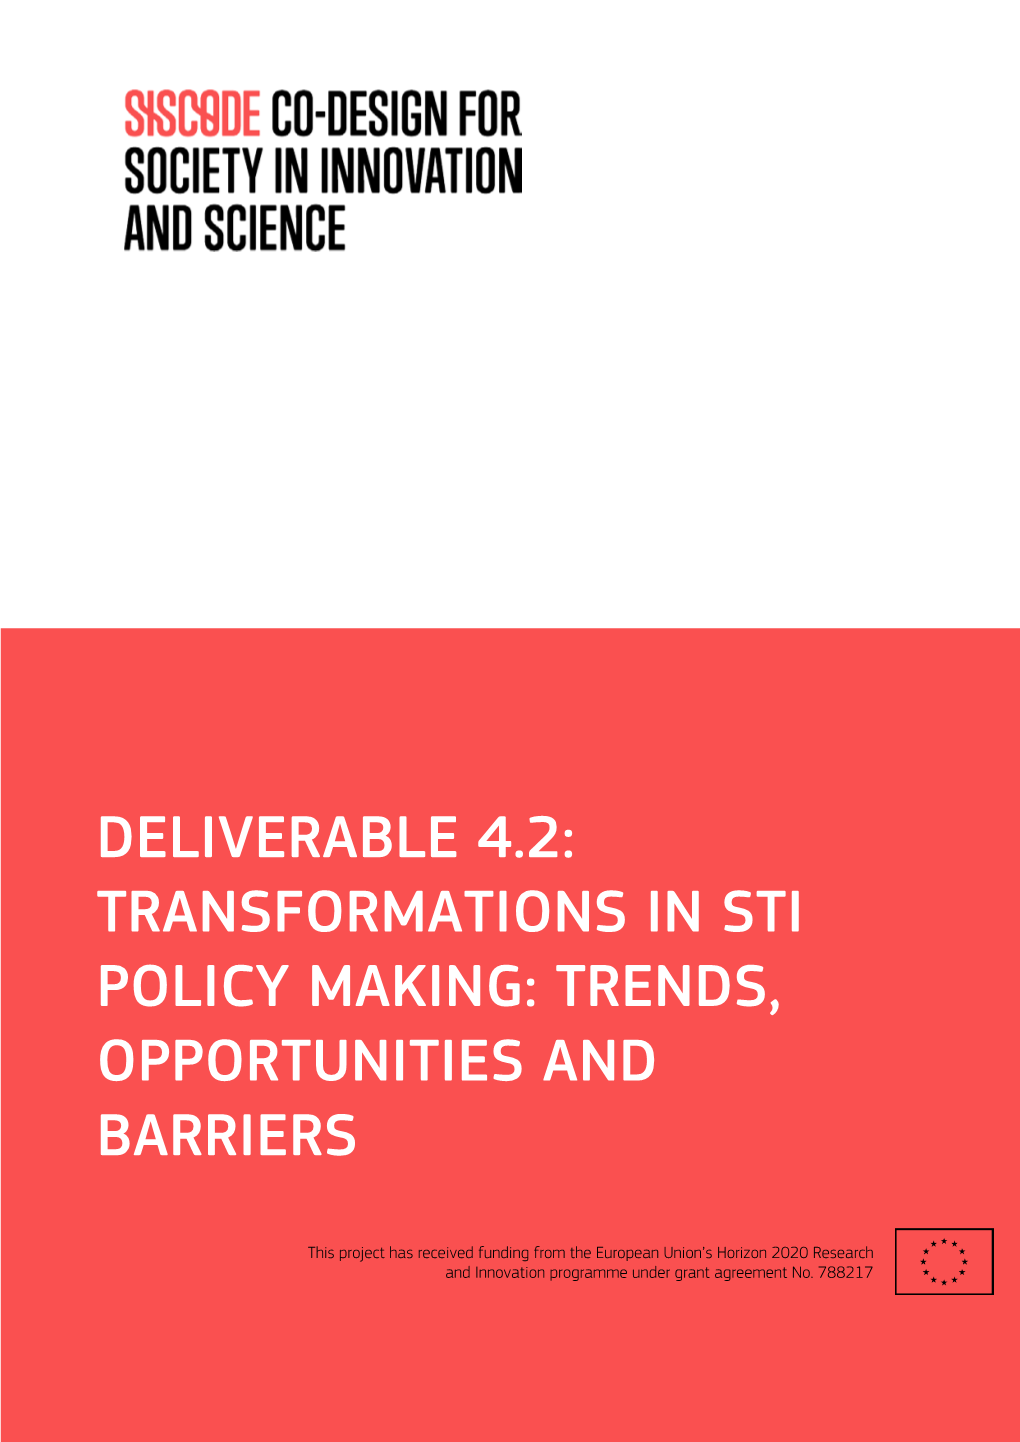 Deliverable 4.2: Transformations in Sti Policy Making: Trends, Opportunities and Barriers